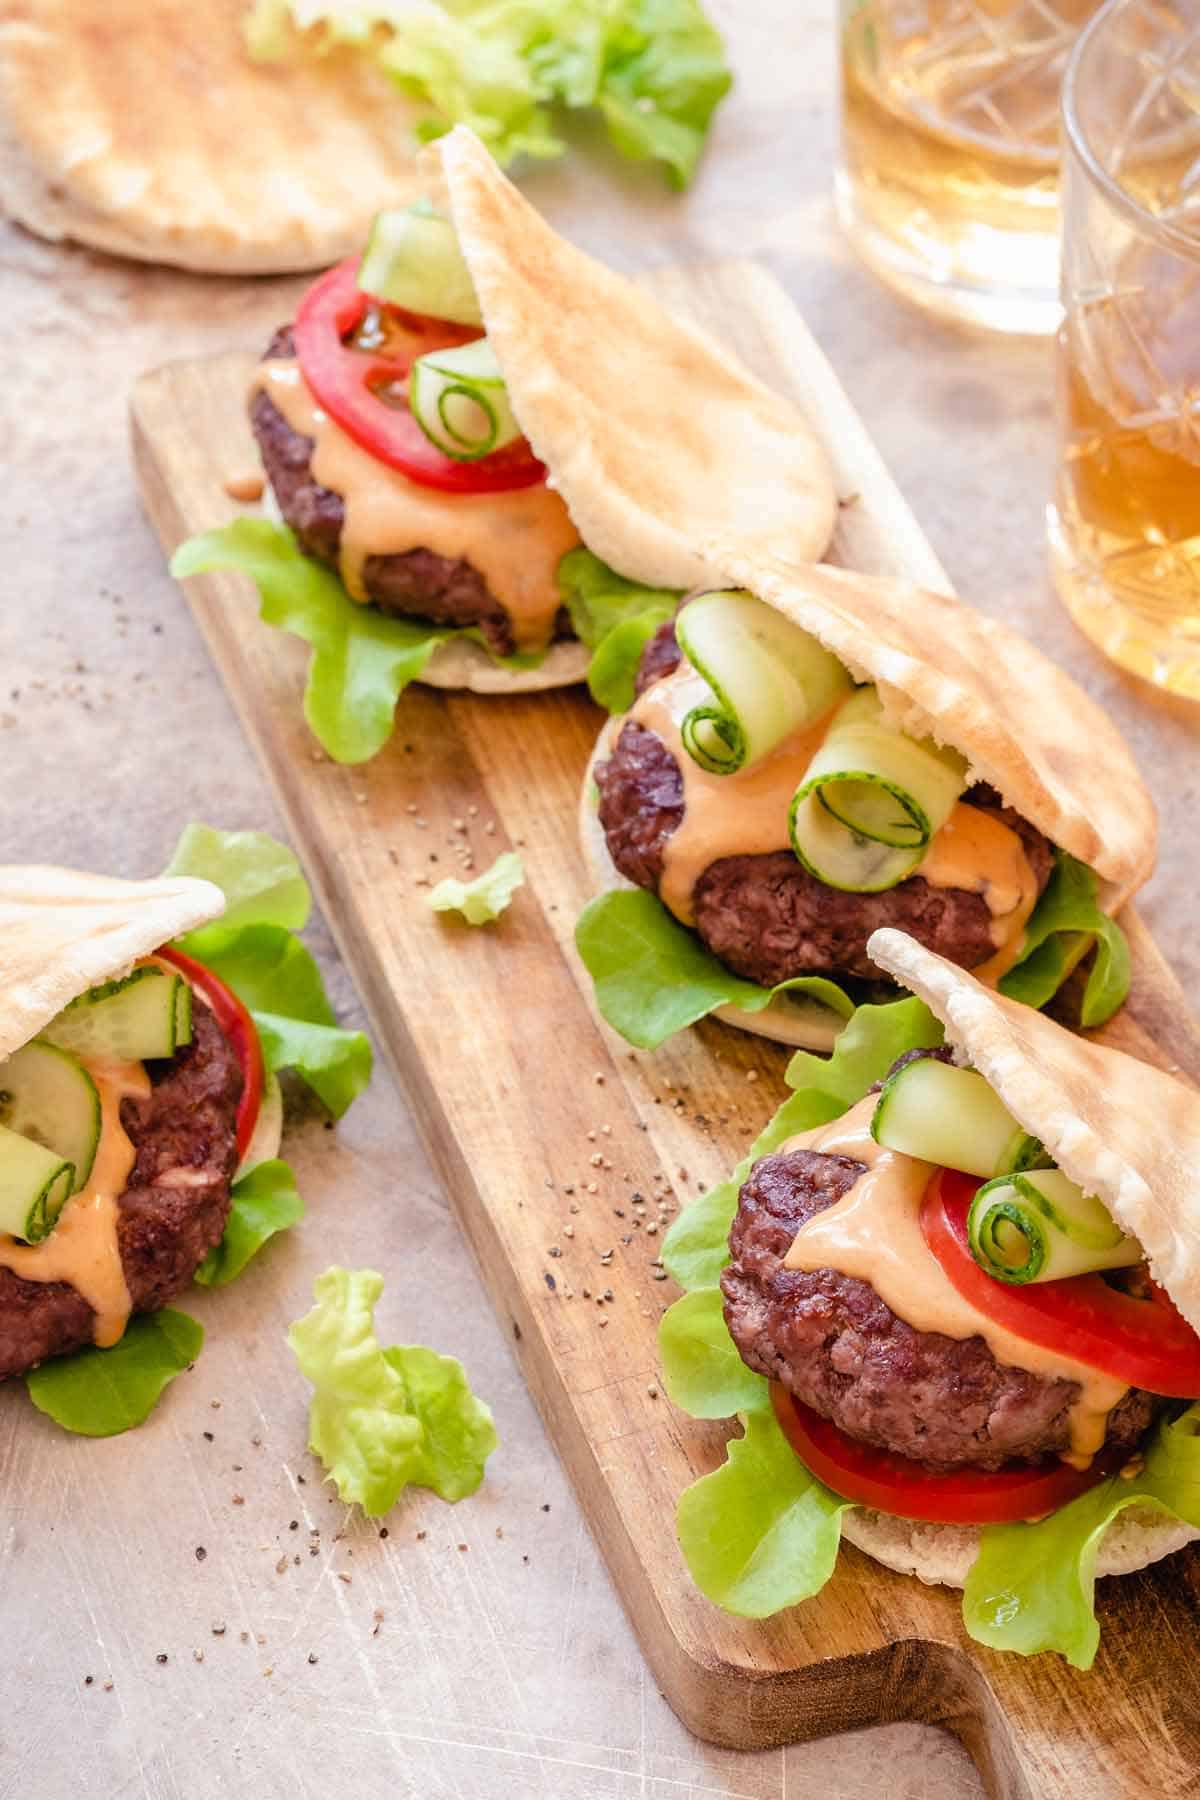 Sandwich board with 3 pita burgers. Lettuce, tomato, sauce, shaved cucumber, and burger are stuffed inside pita bread.